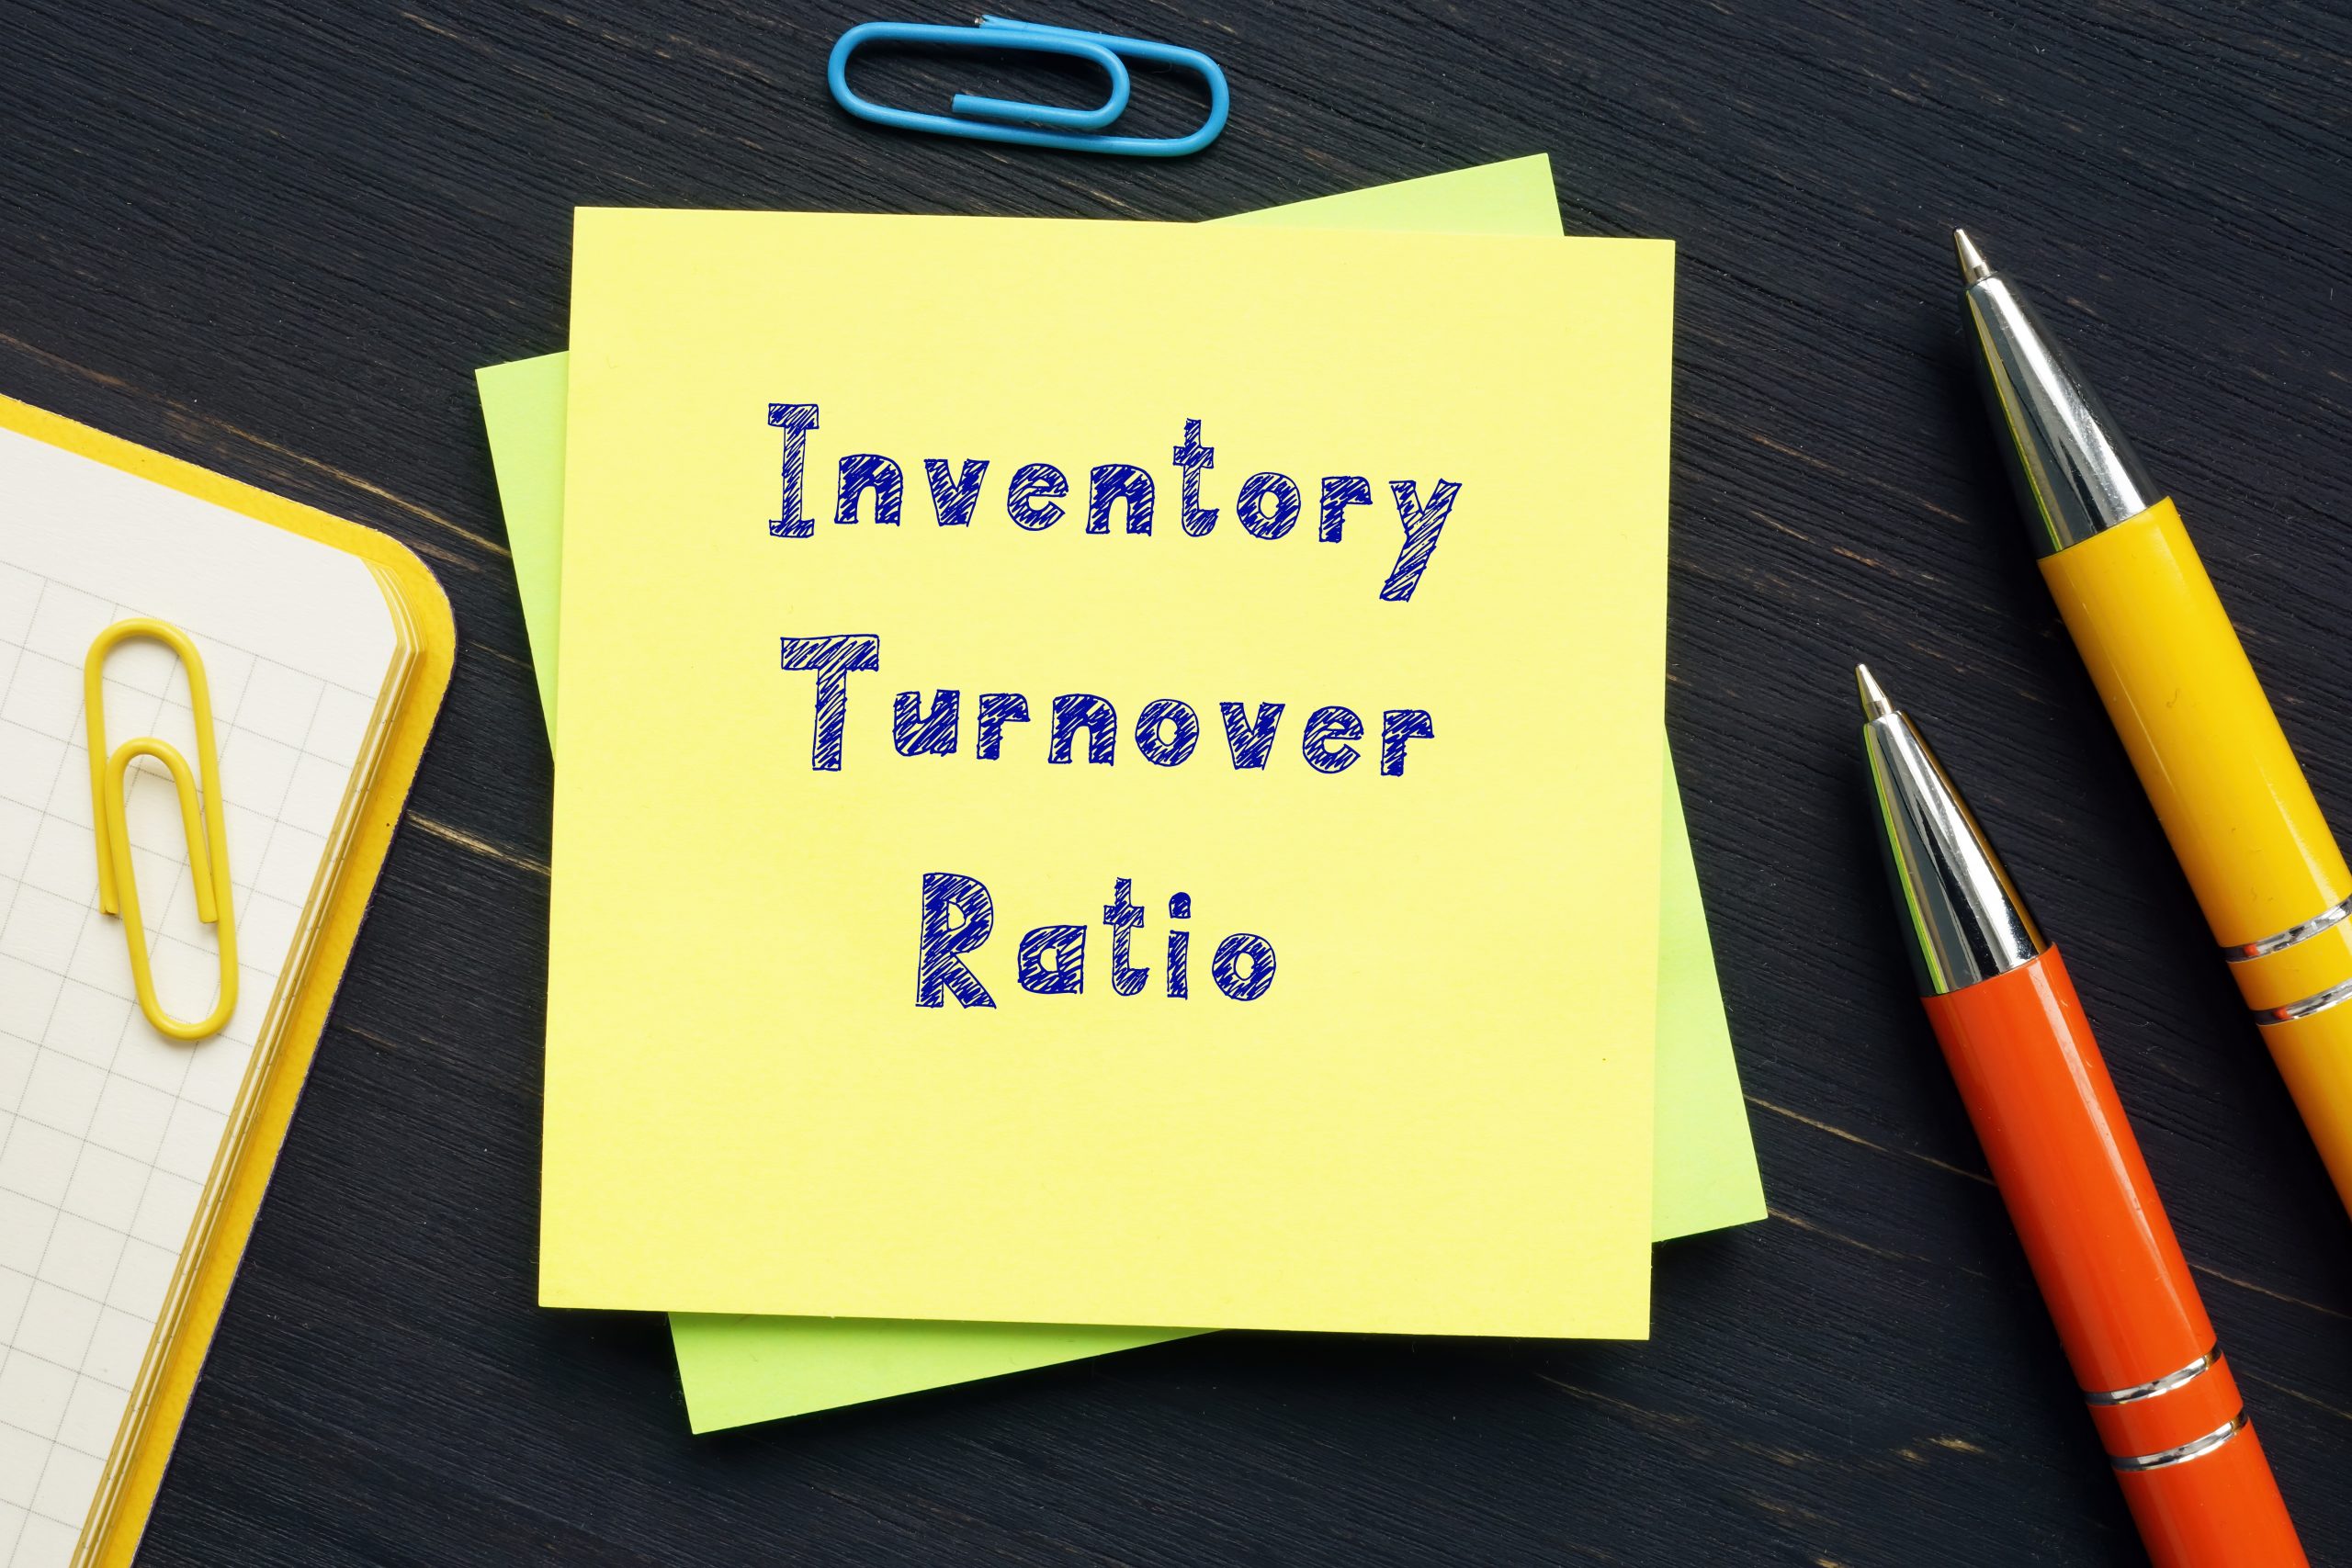 "Inventory turnover ratio: written on a Post-it note on a desk